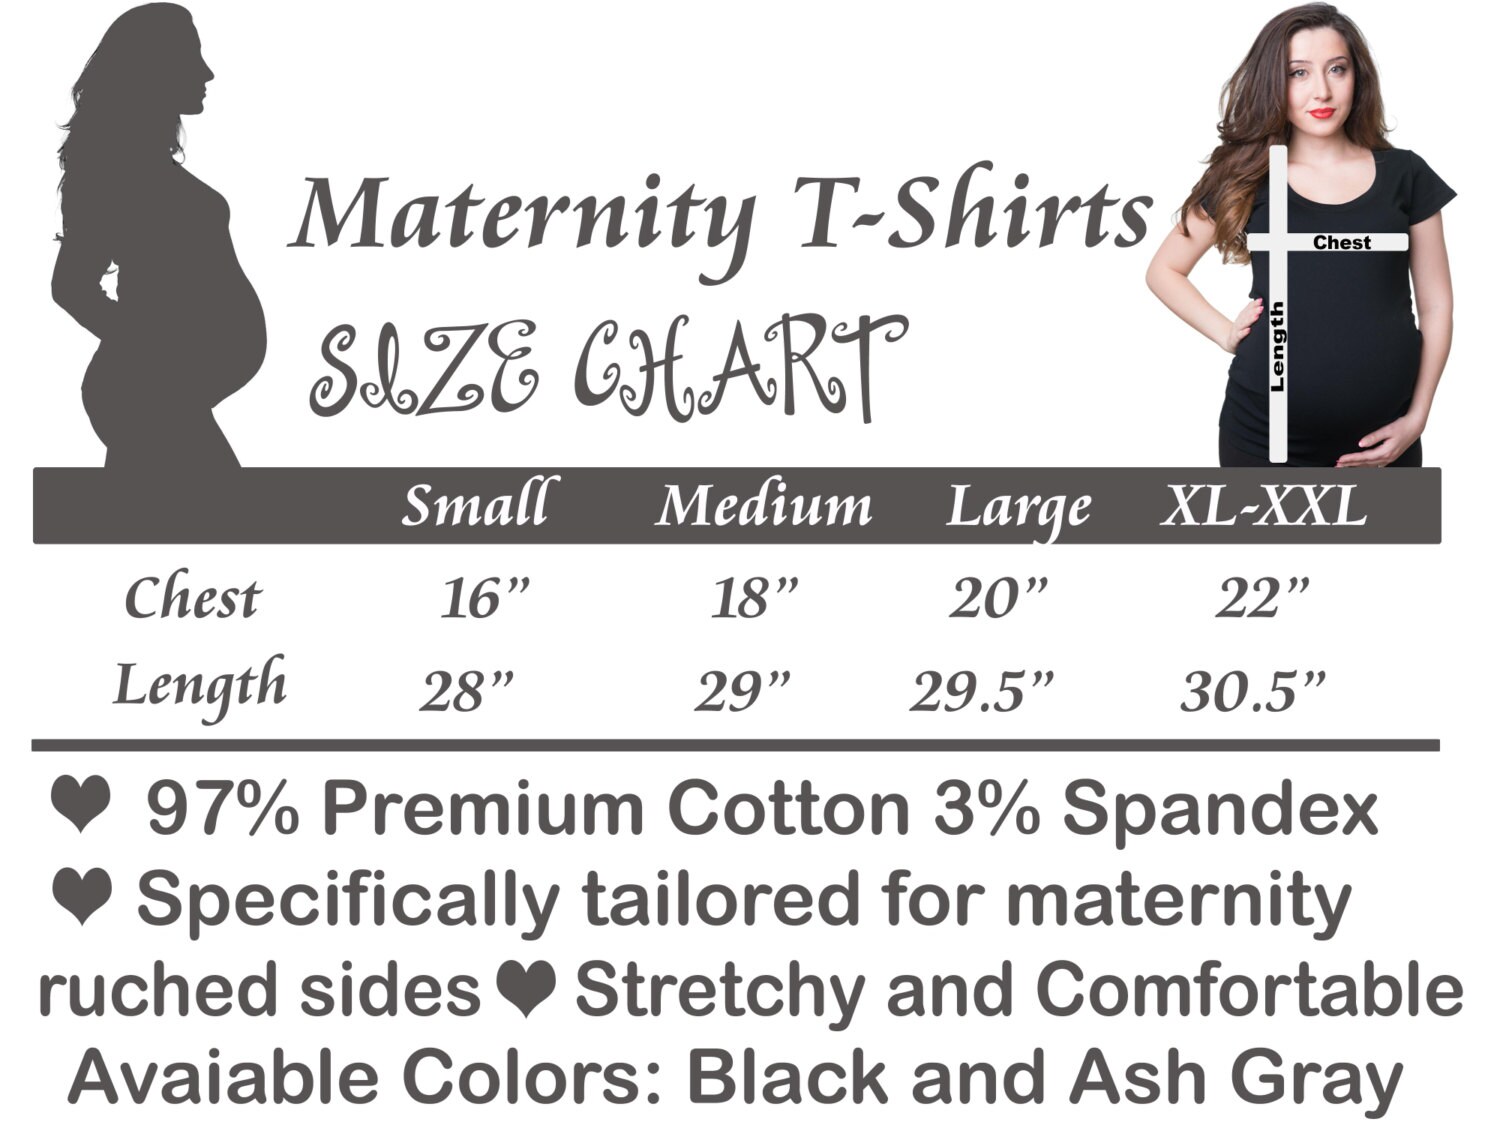 Silk Road Tees Couple Maternity Shirts New Baby Announcement T-Shirts Dad and Mom Maternity Funny T-Shirt 